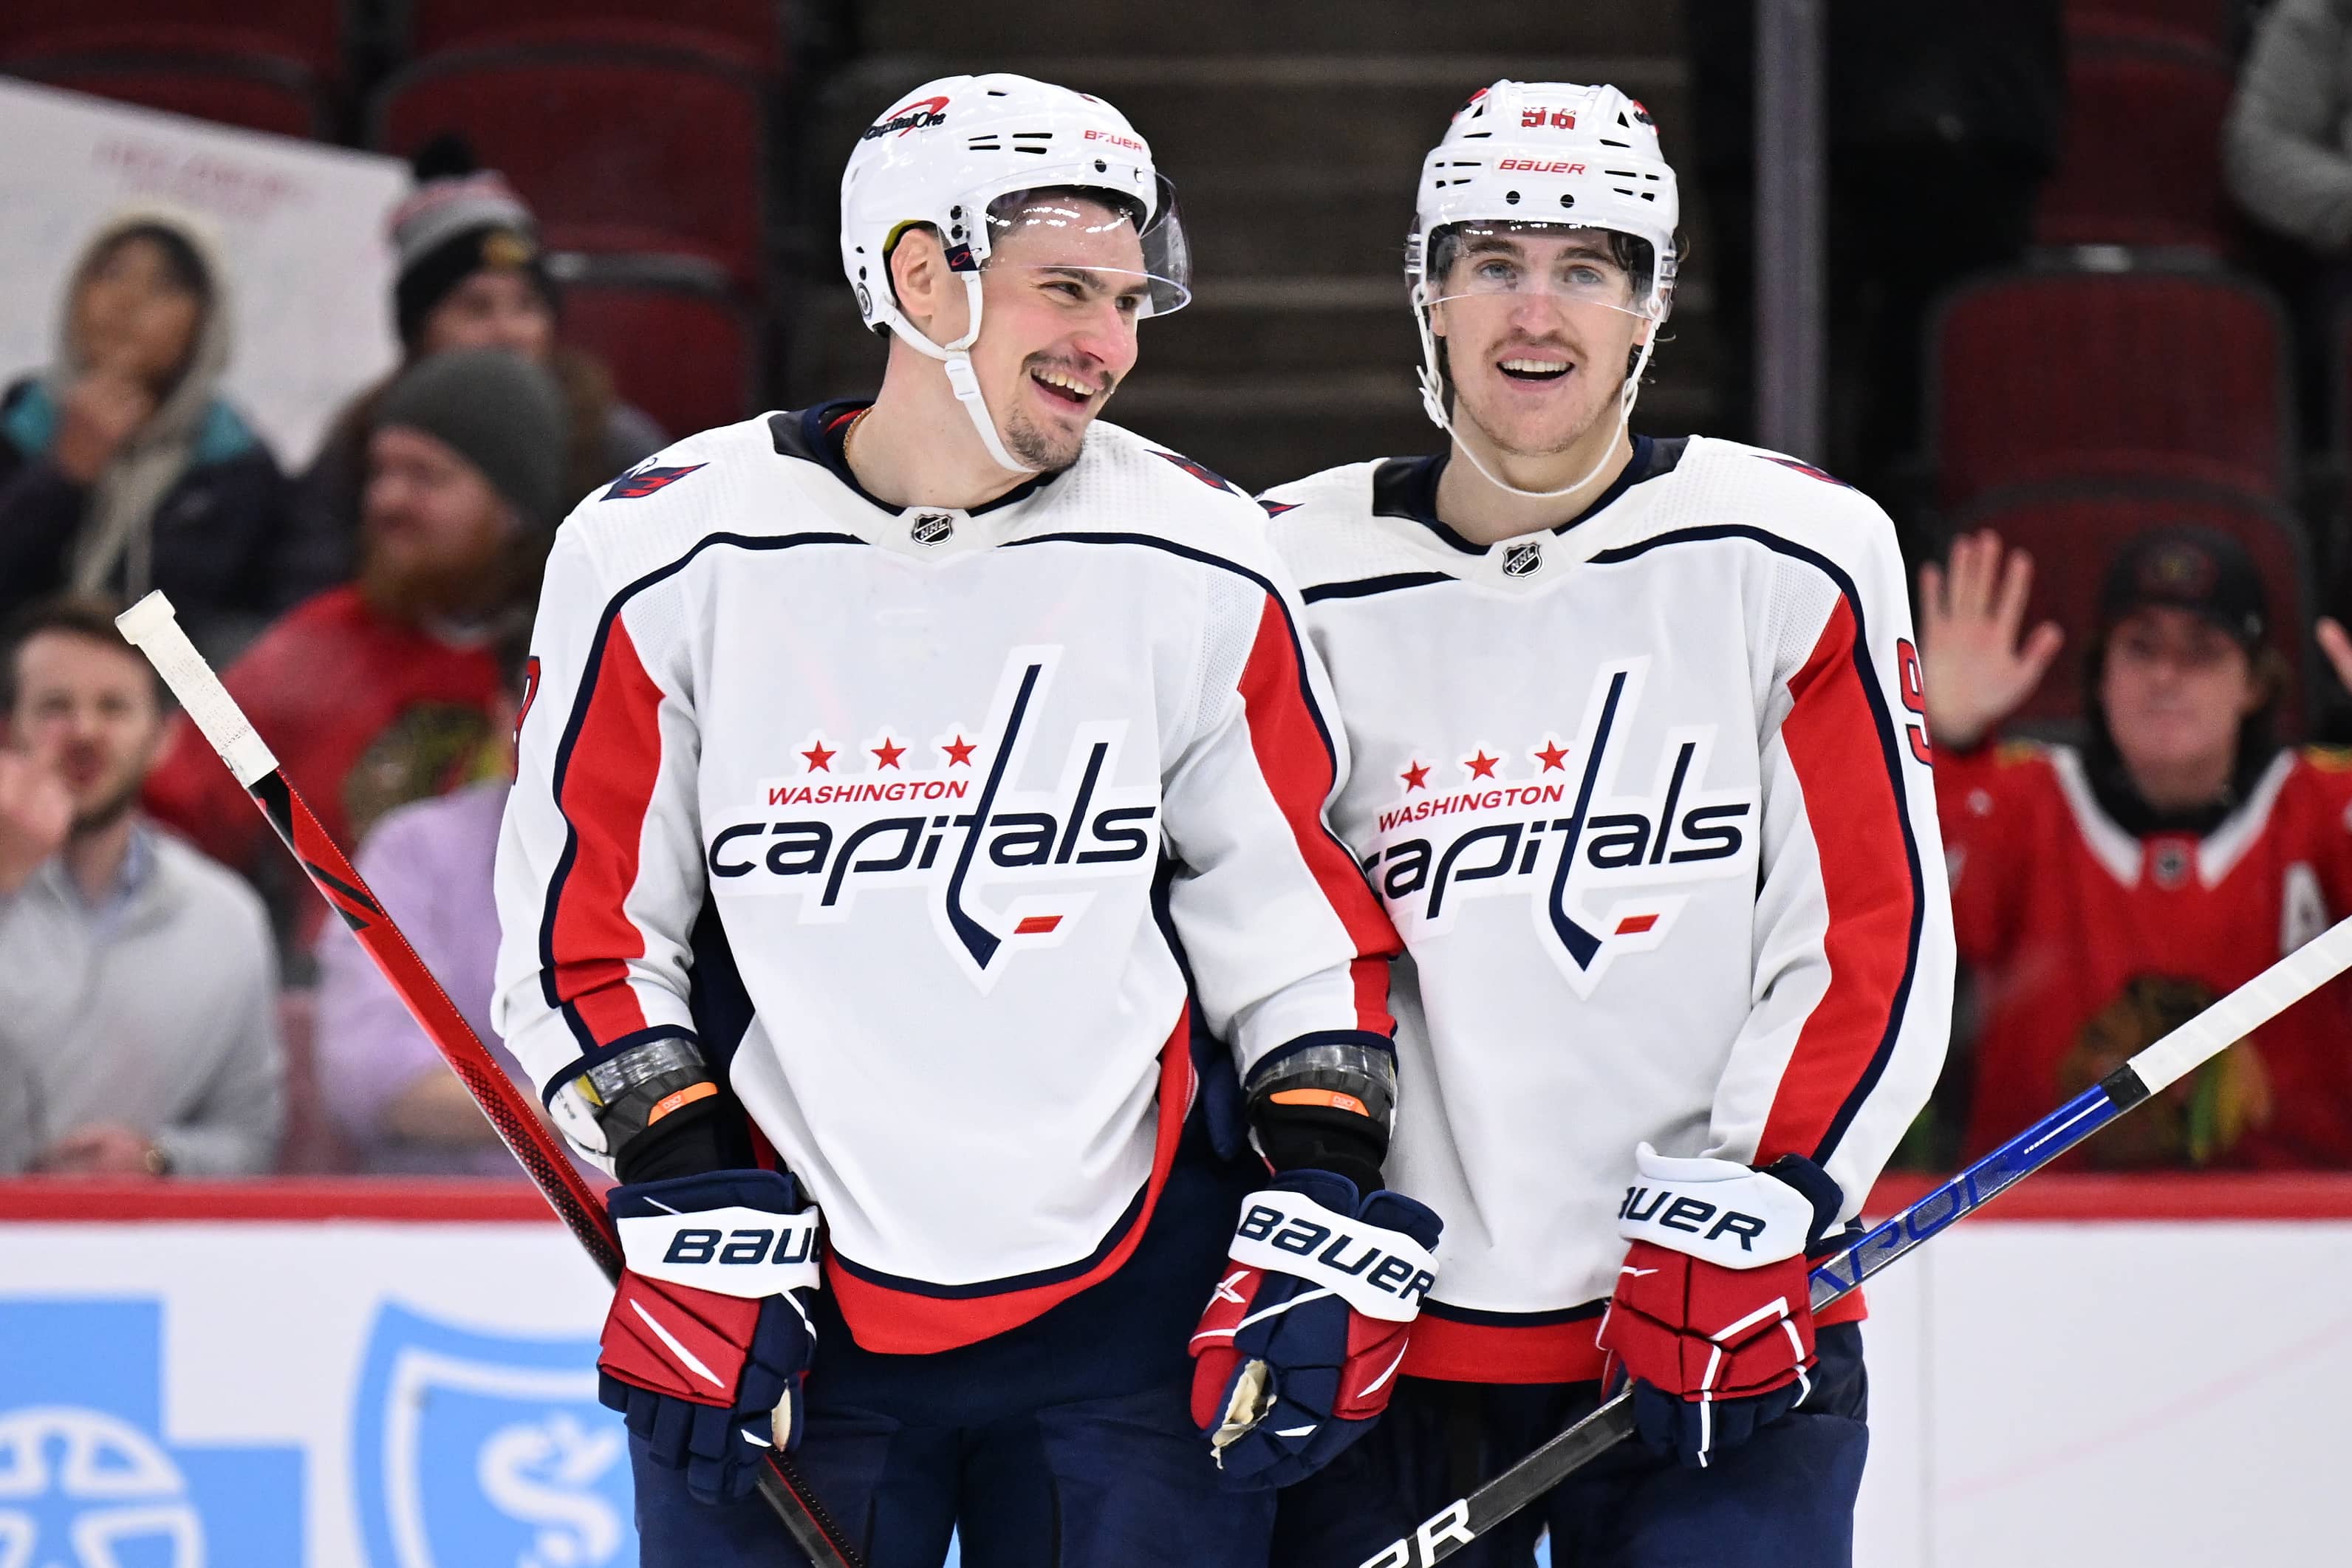 NHL-leading Bruins acquire Orlov, Hathaway from Capitals